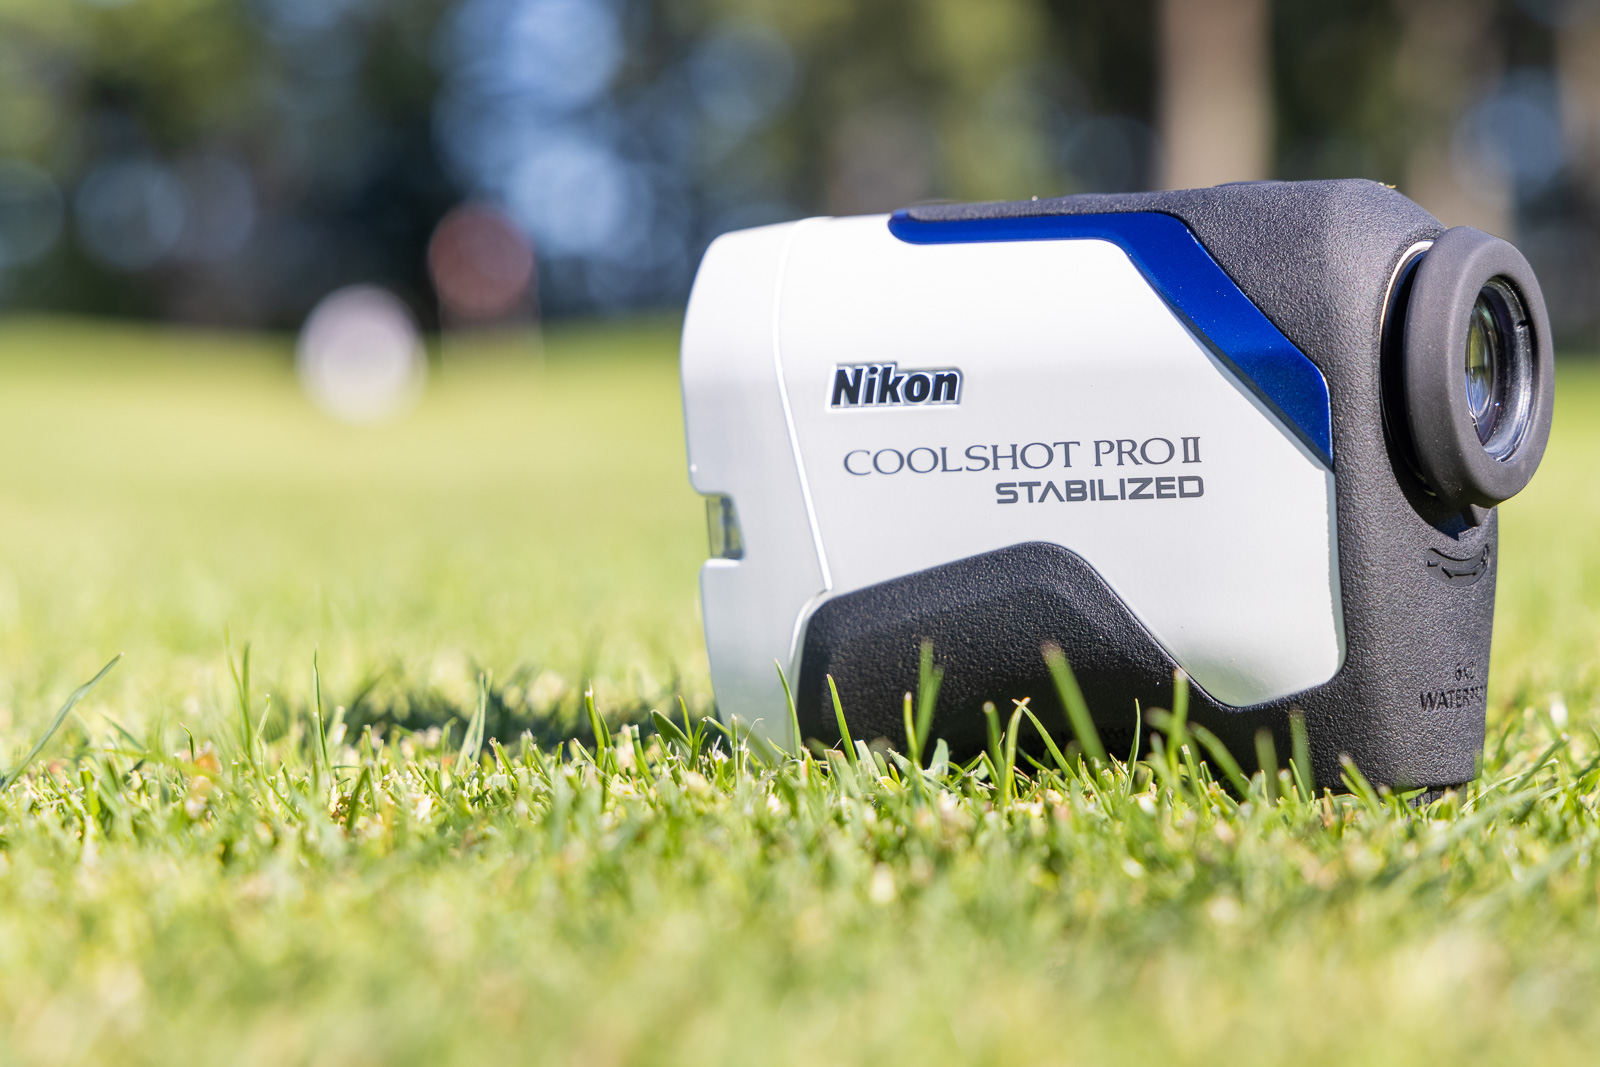 Nikon Coolshot ProII Stabilized Rangefinder Review: Can it Compete?